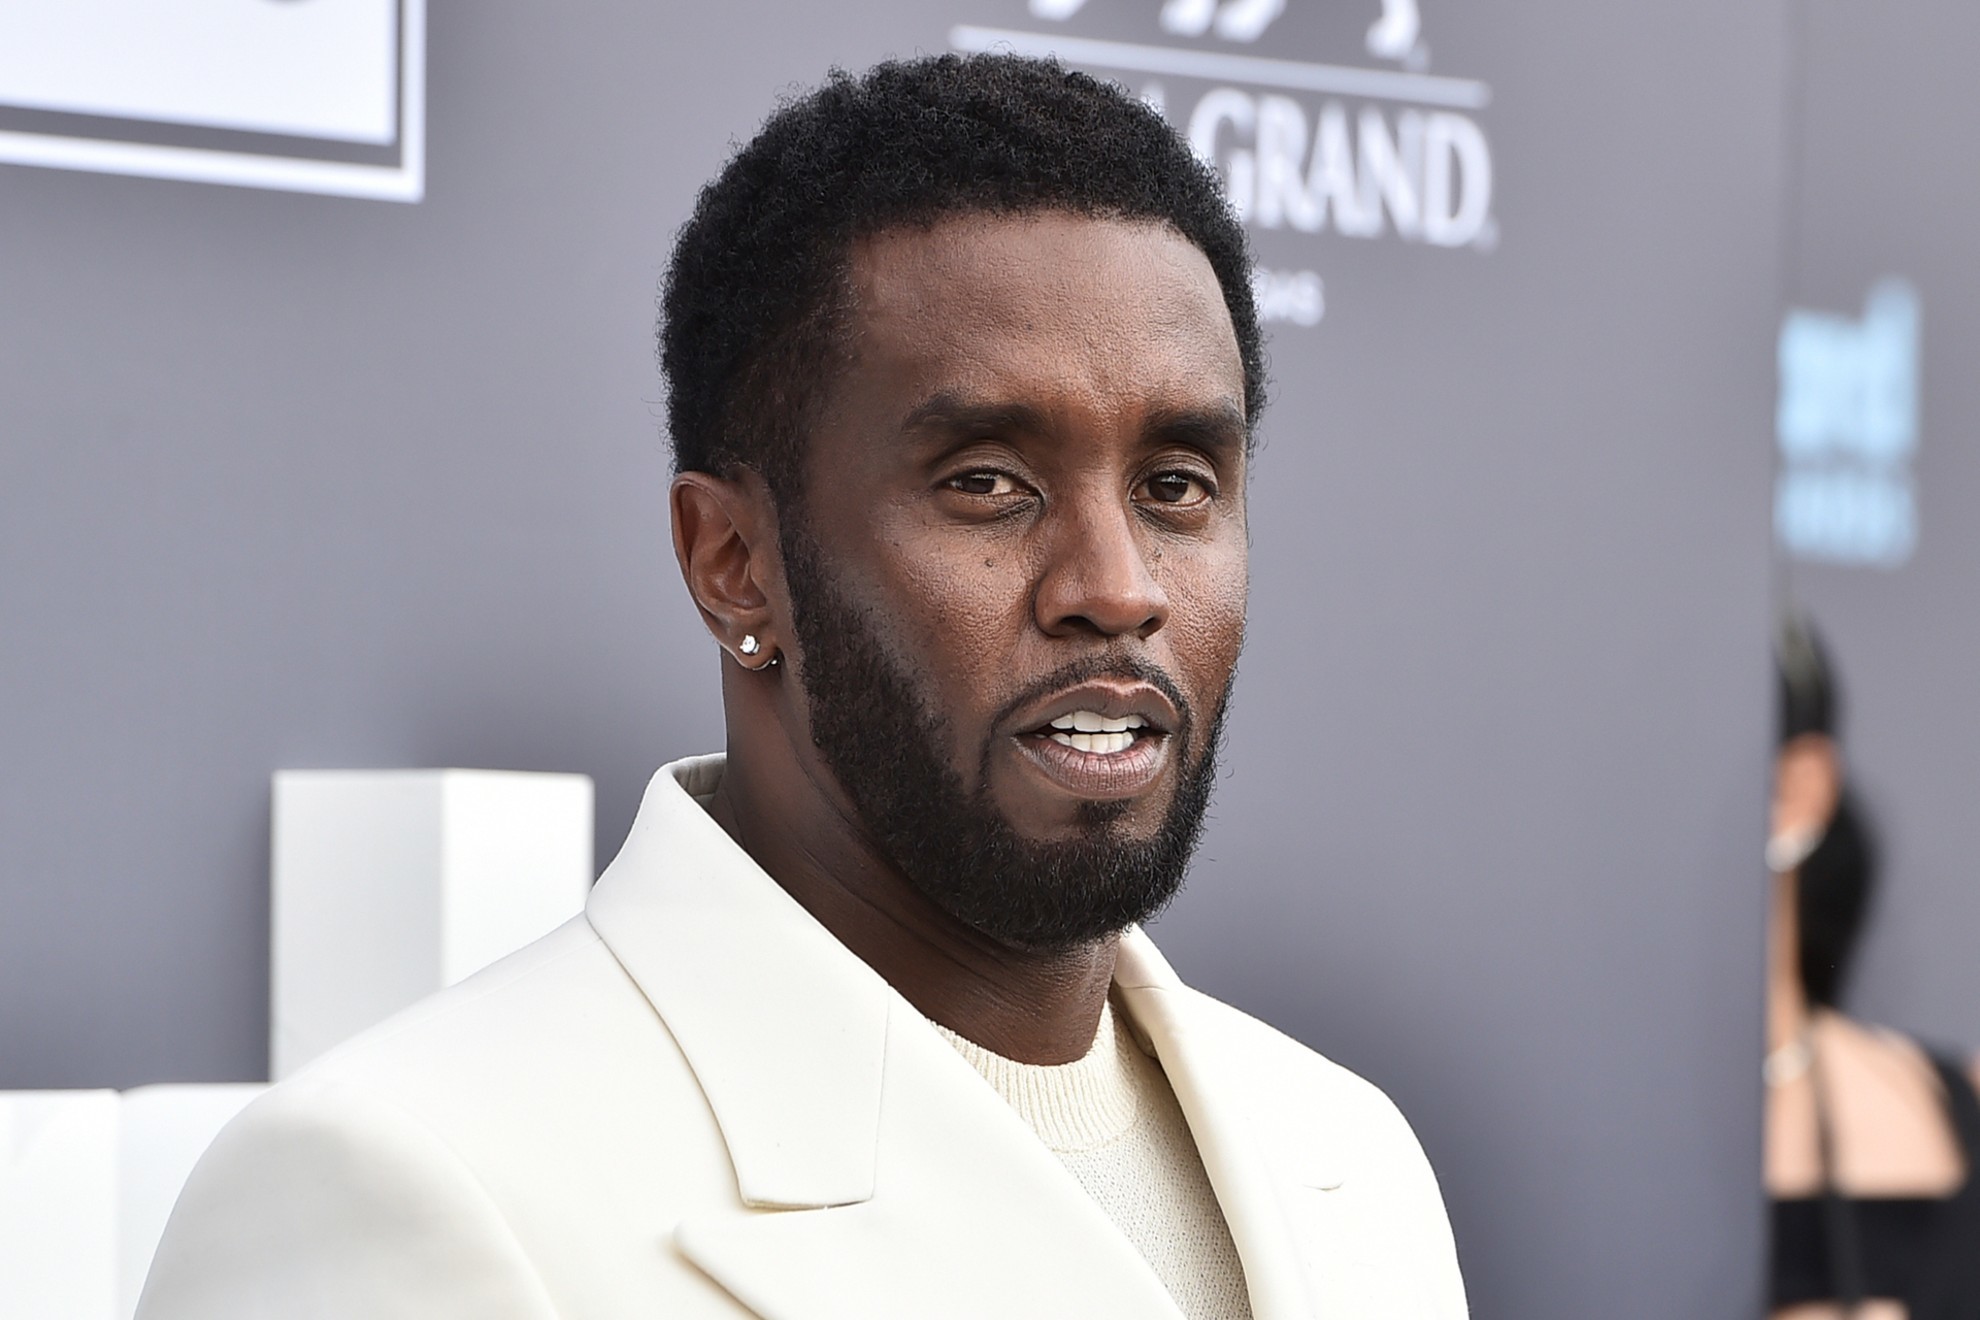 Sean Diddy Combs files motion to dismiss some claims in a sexual assault lawsuit